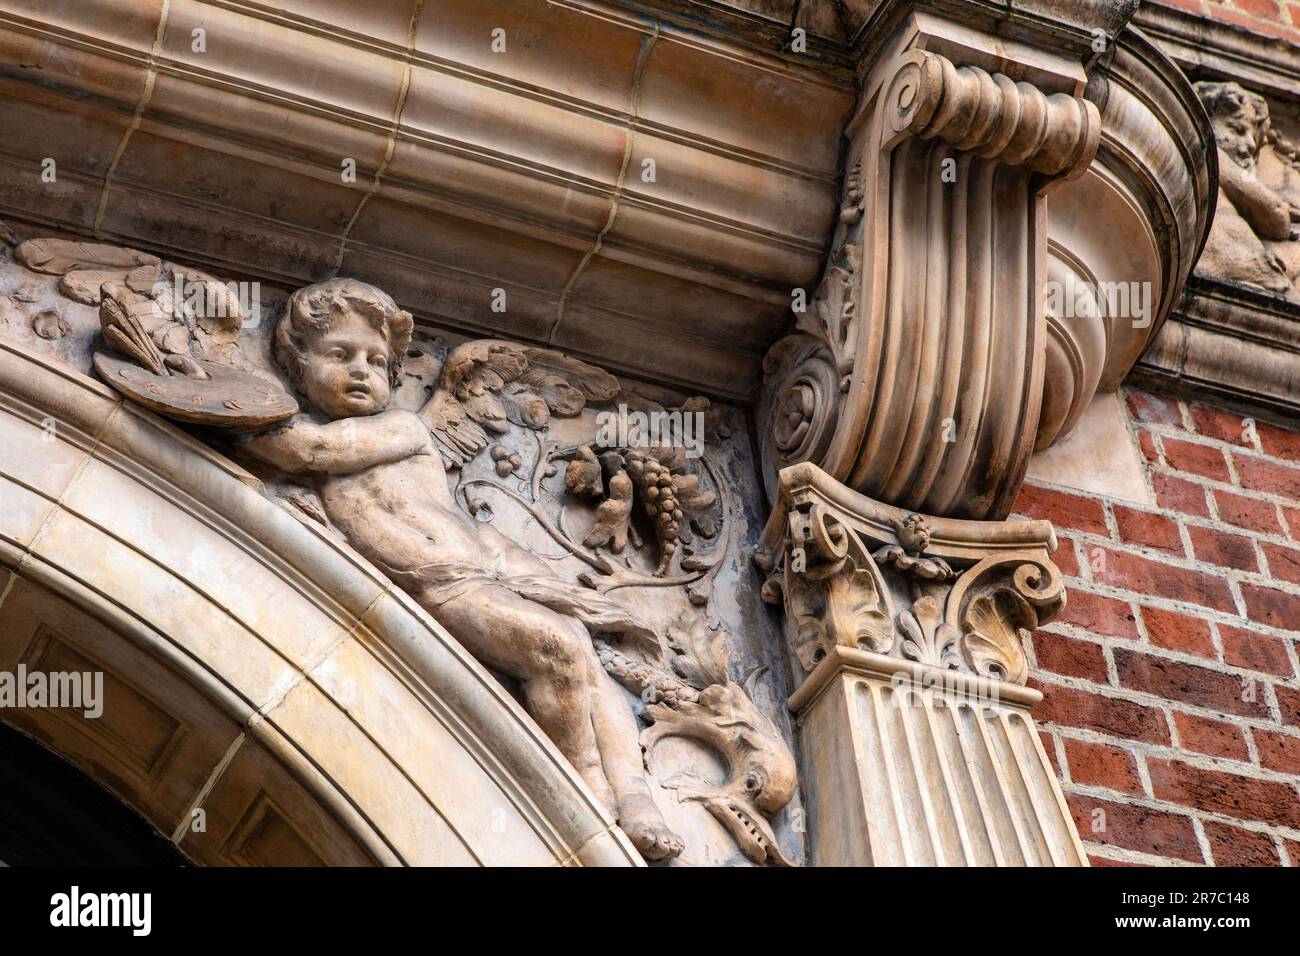 London, UK - March 2nd 2023: The ornate stone sculpture above the entrance sign to the Whitechapel Gallery in London, UK. Stock Photo